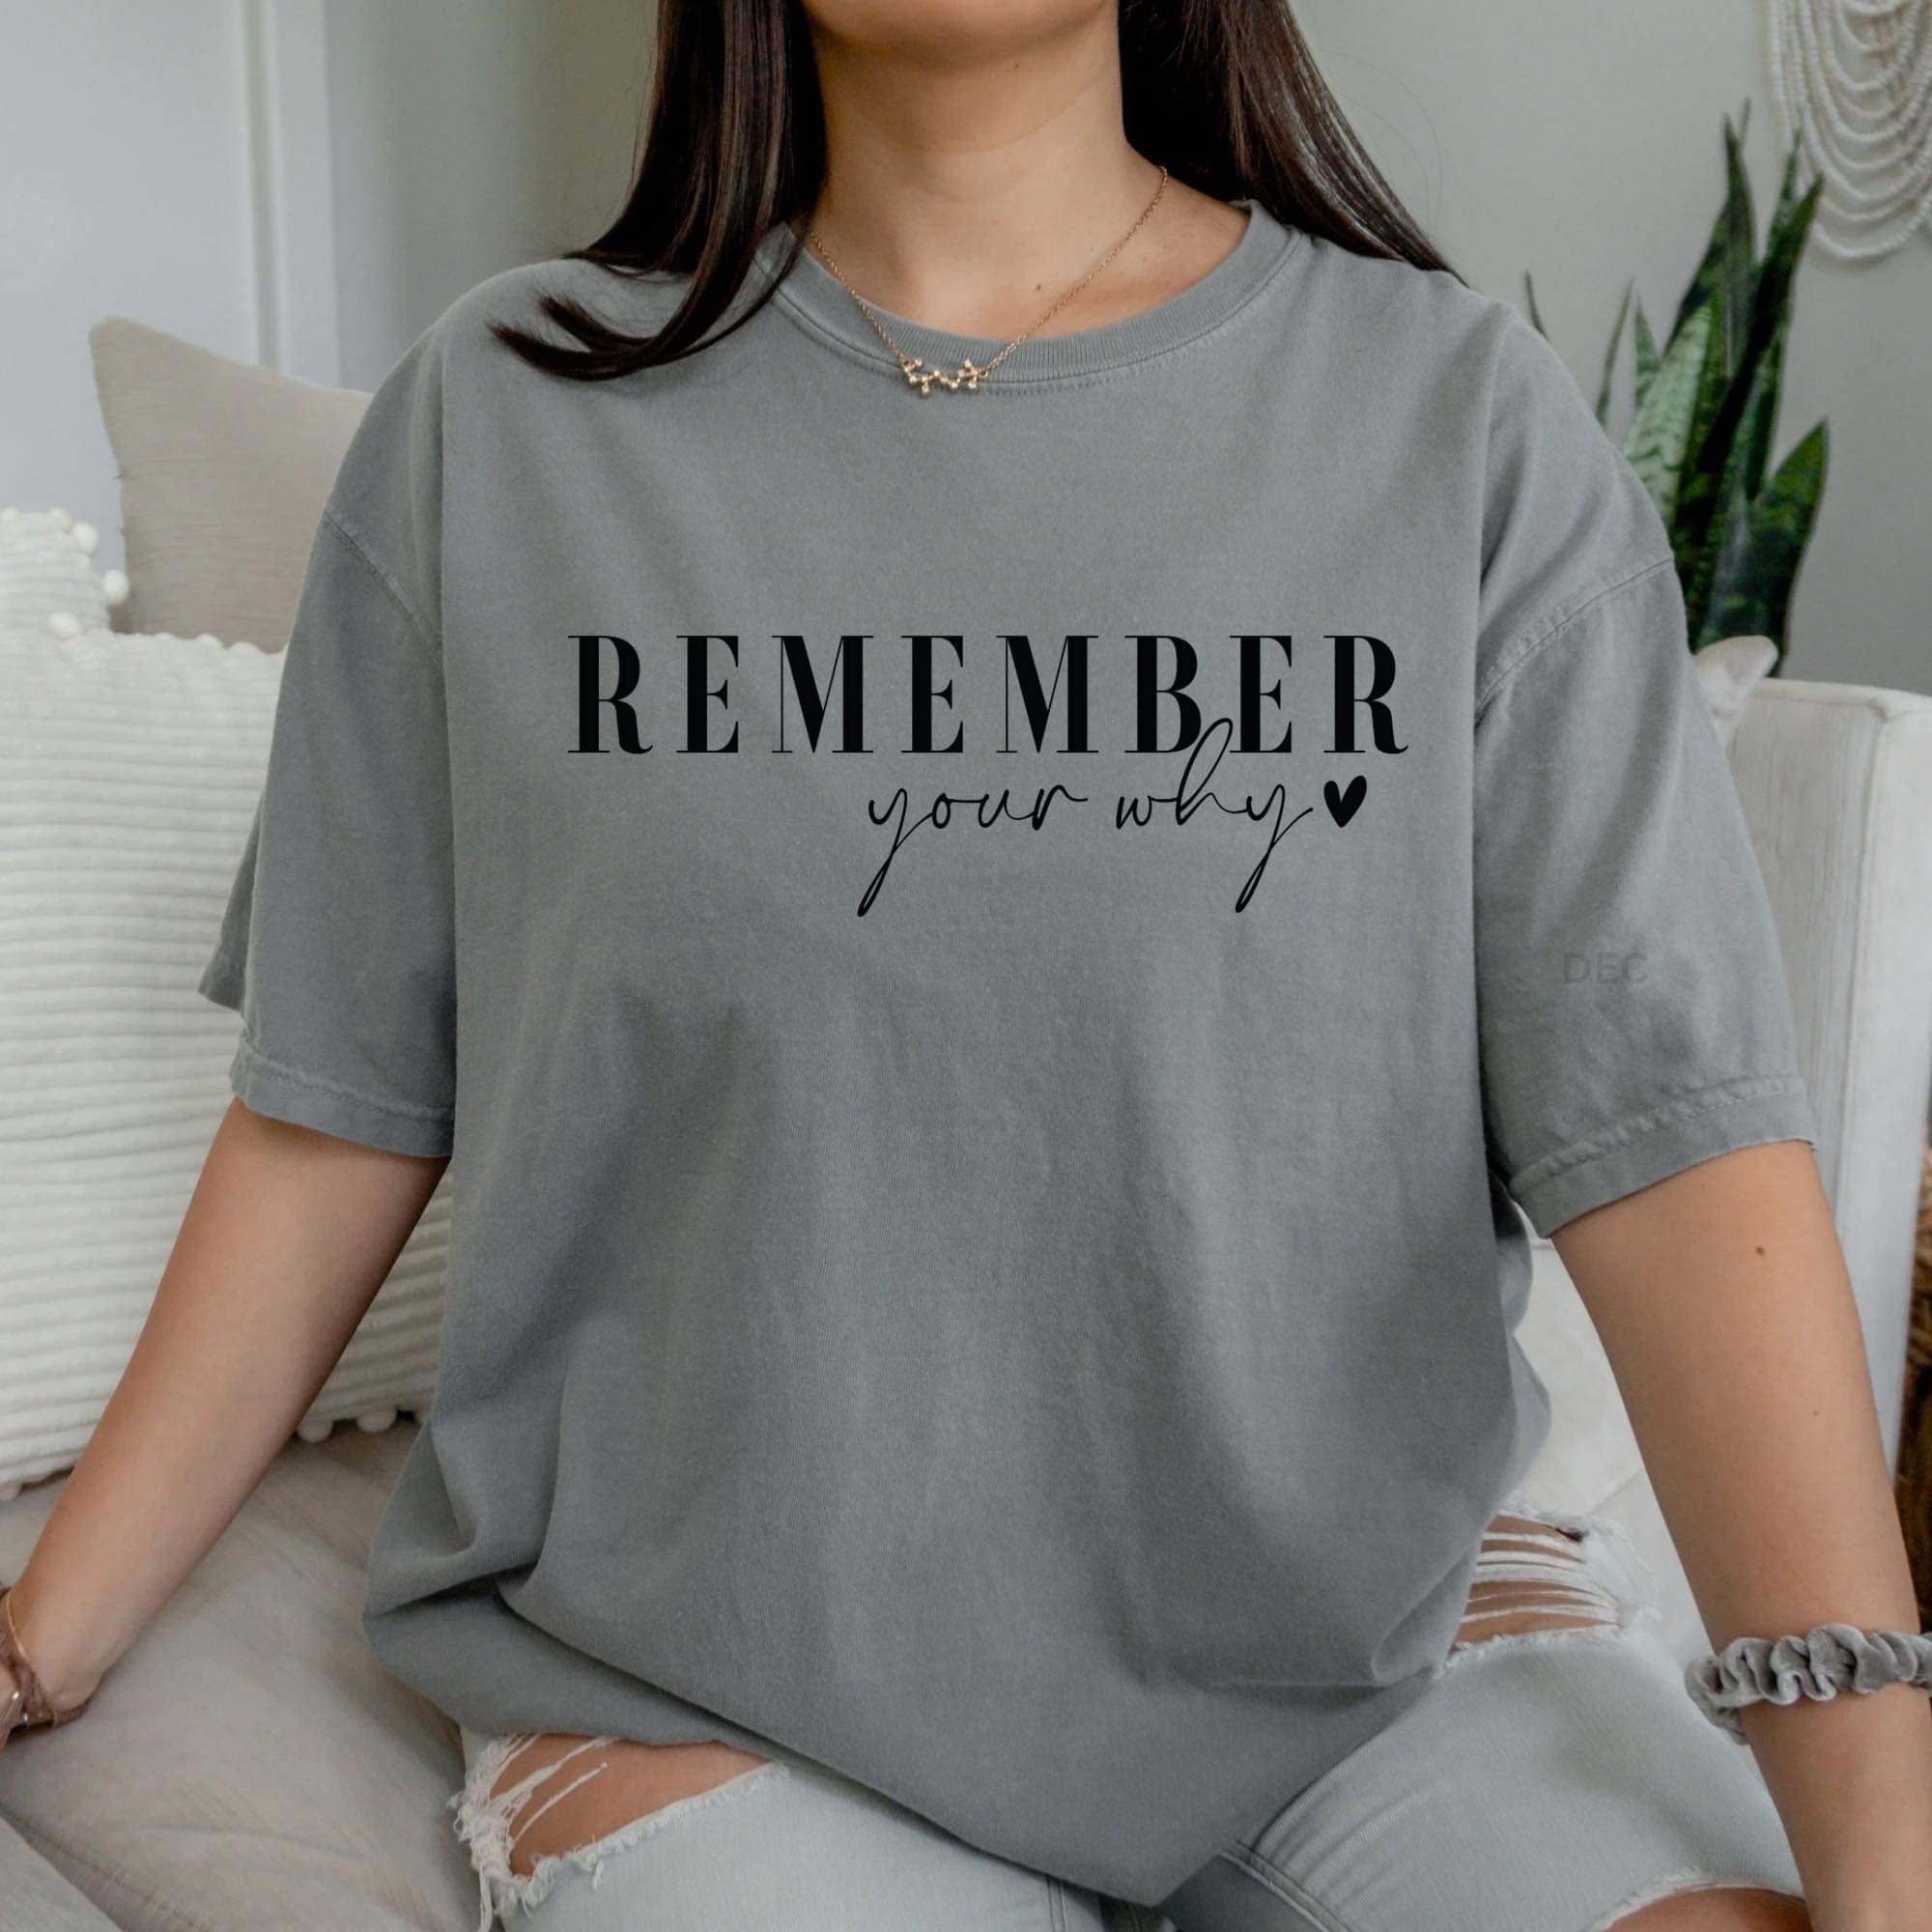 Remember your why sweatshirt (white font)